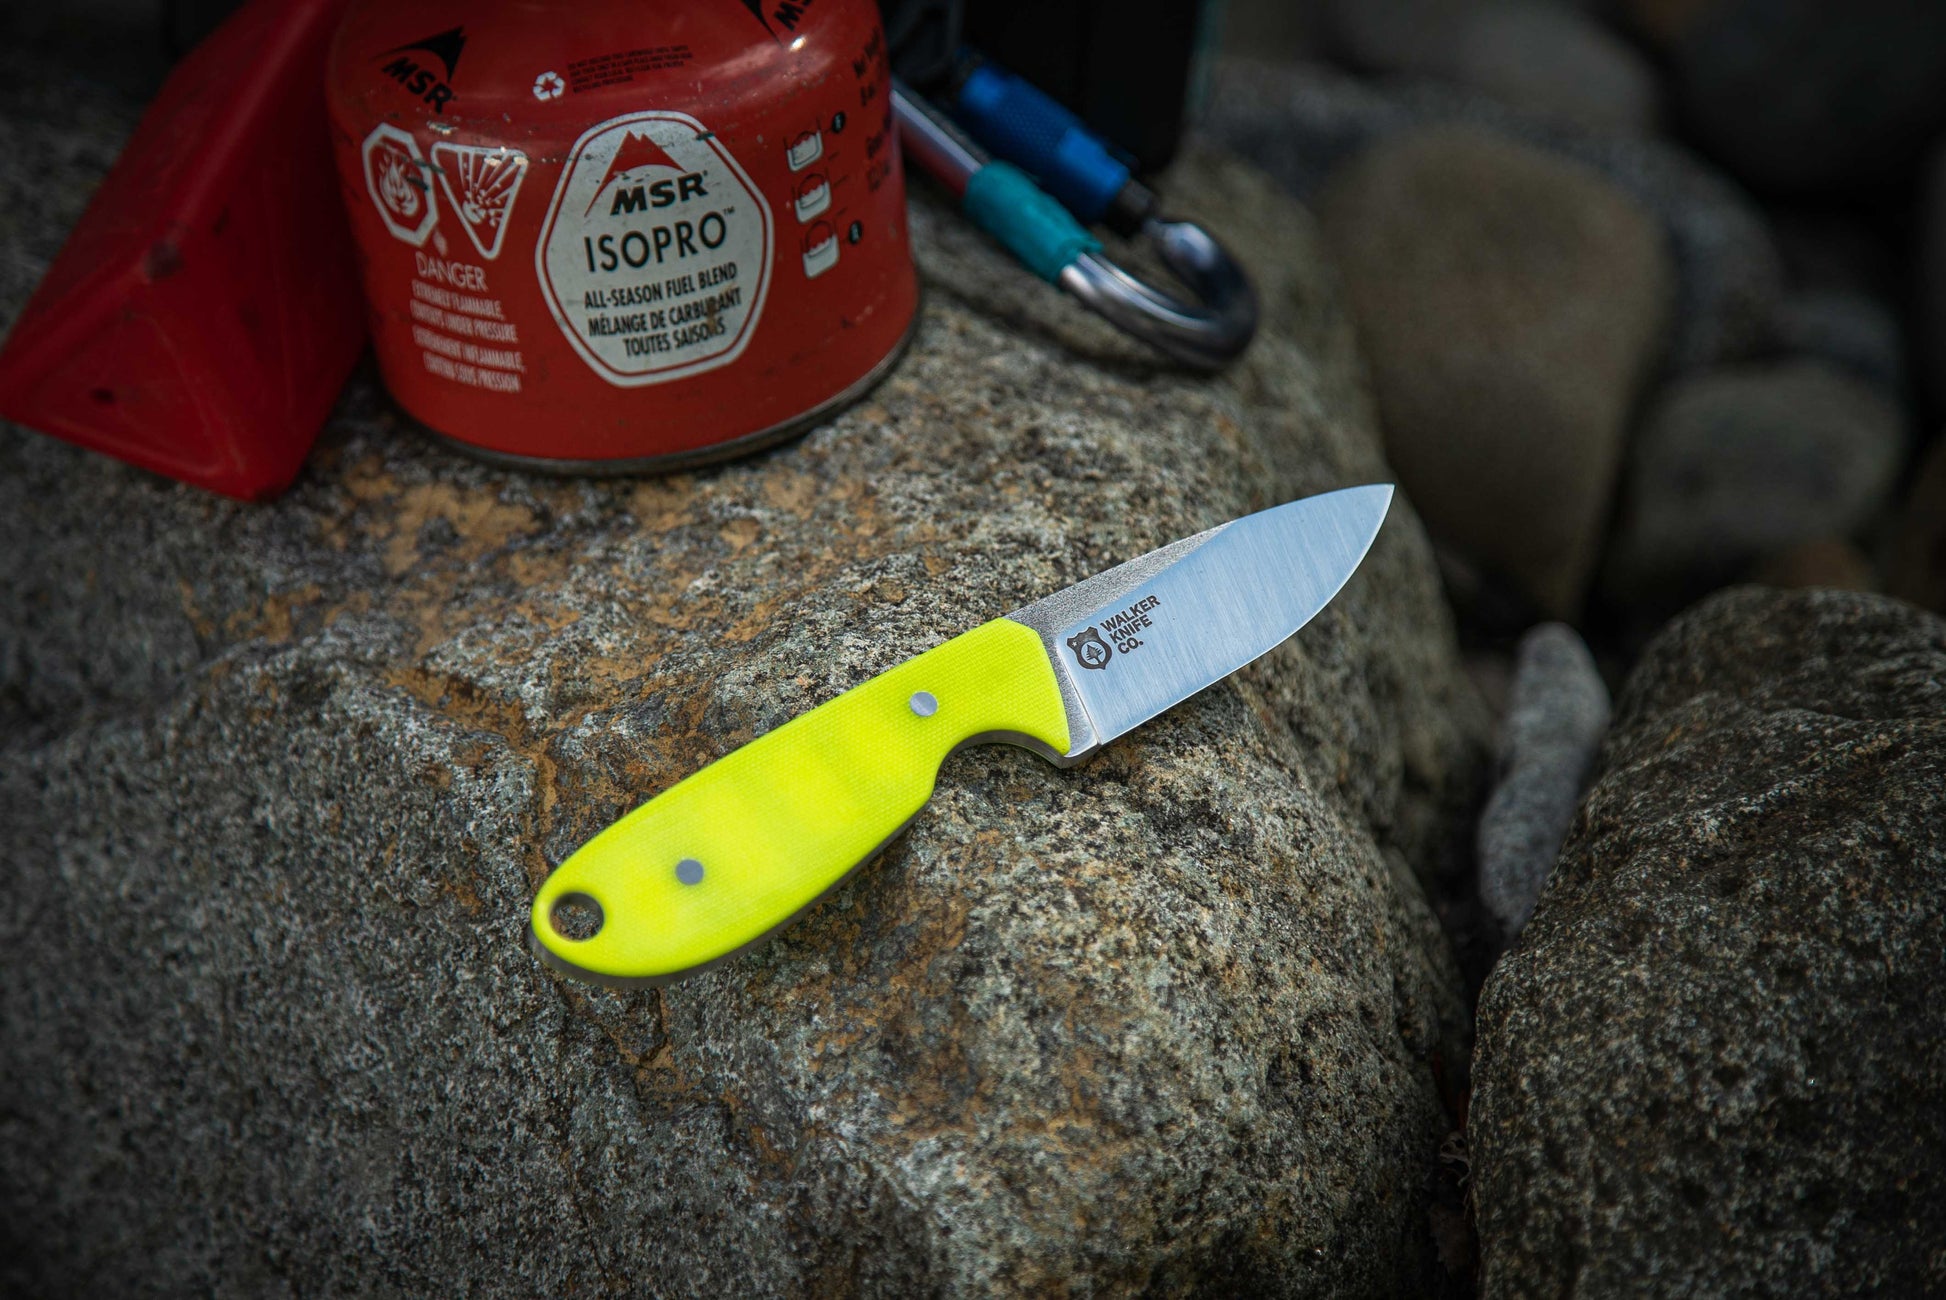 River Knife in camp built tough with G10 handle scales